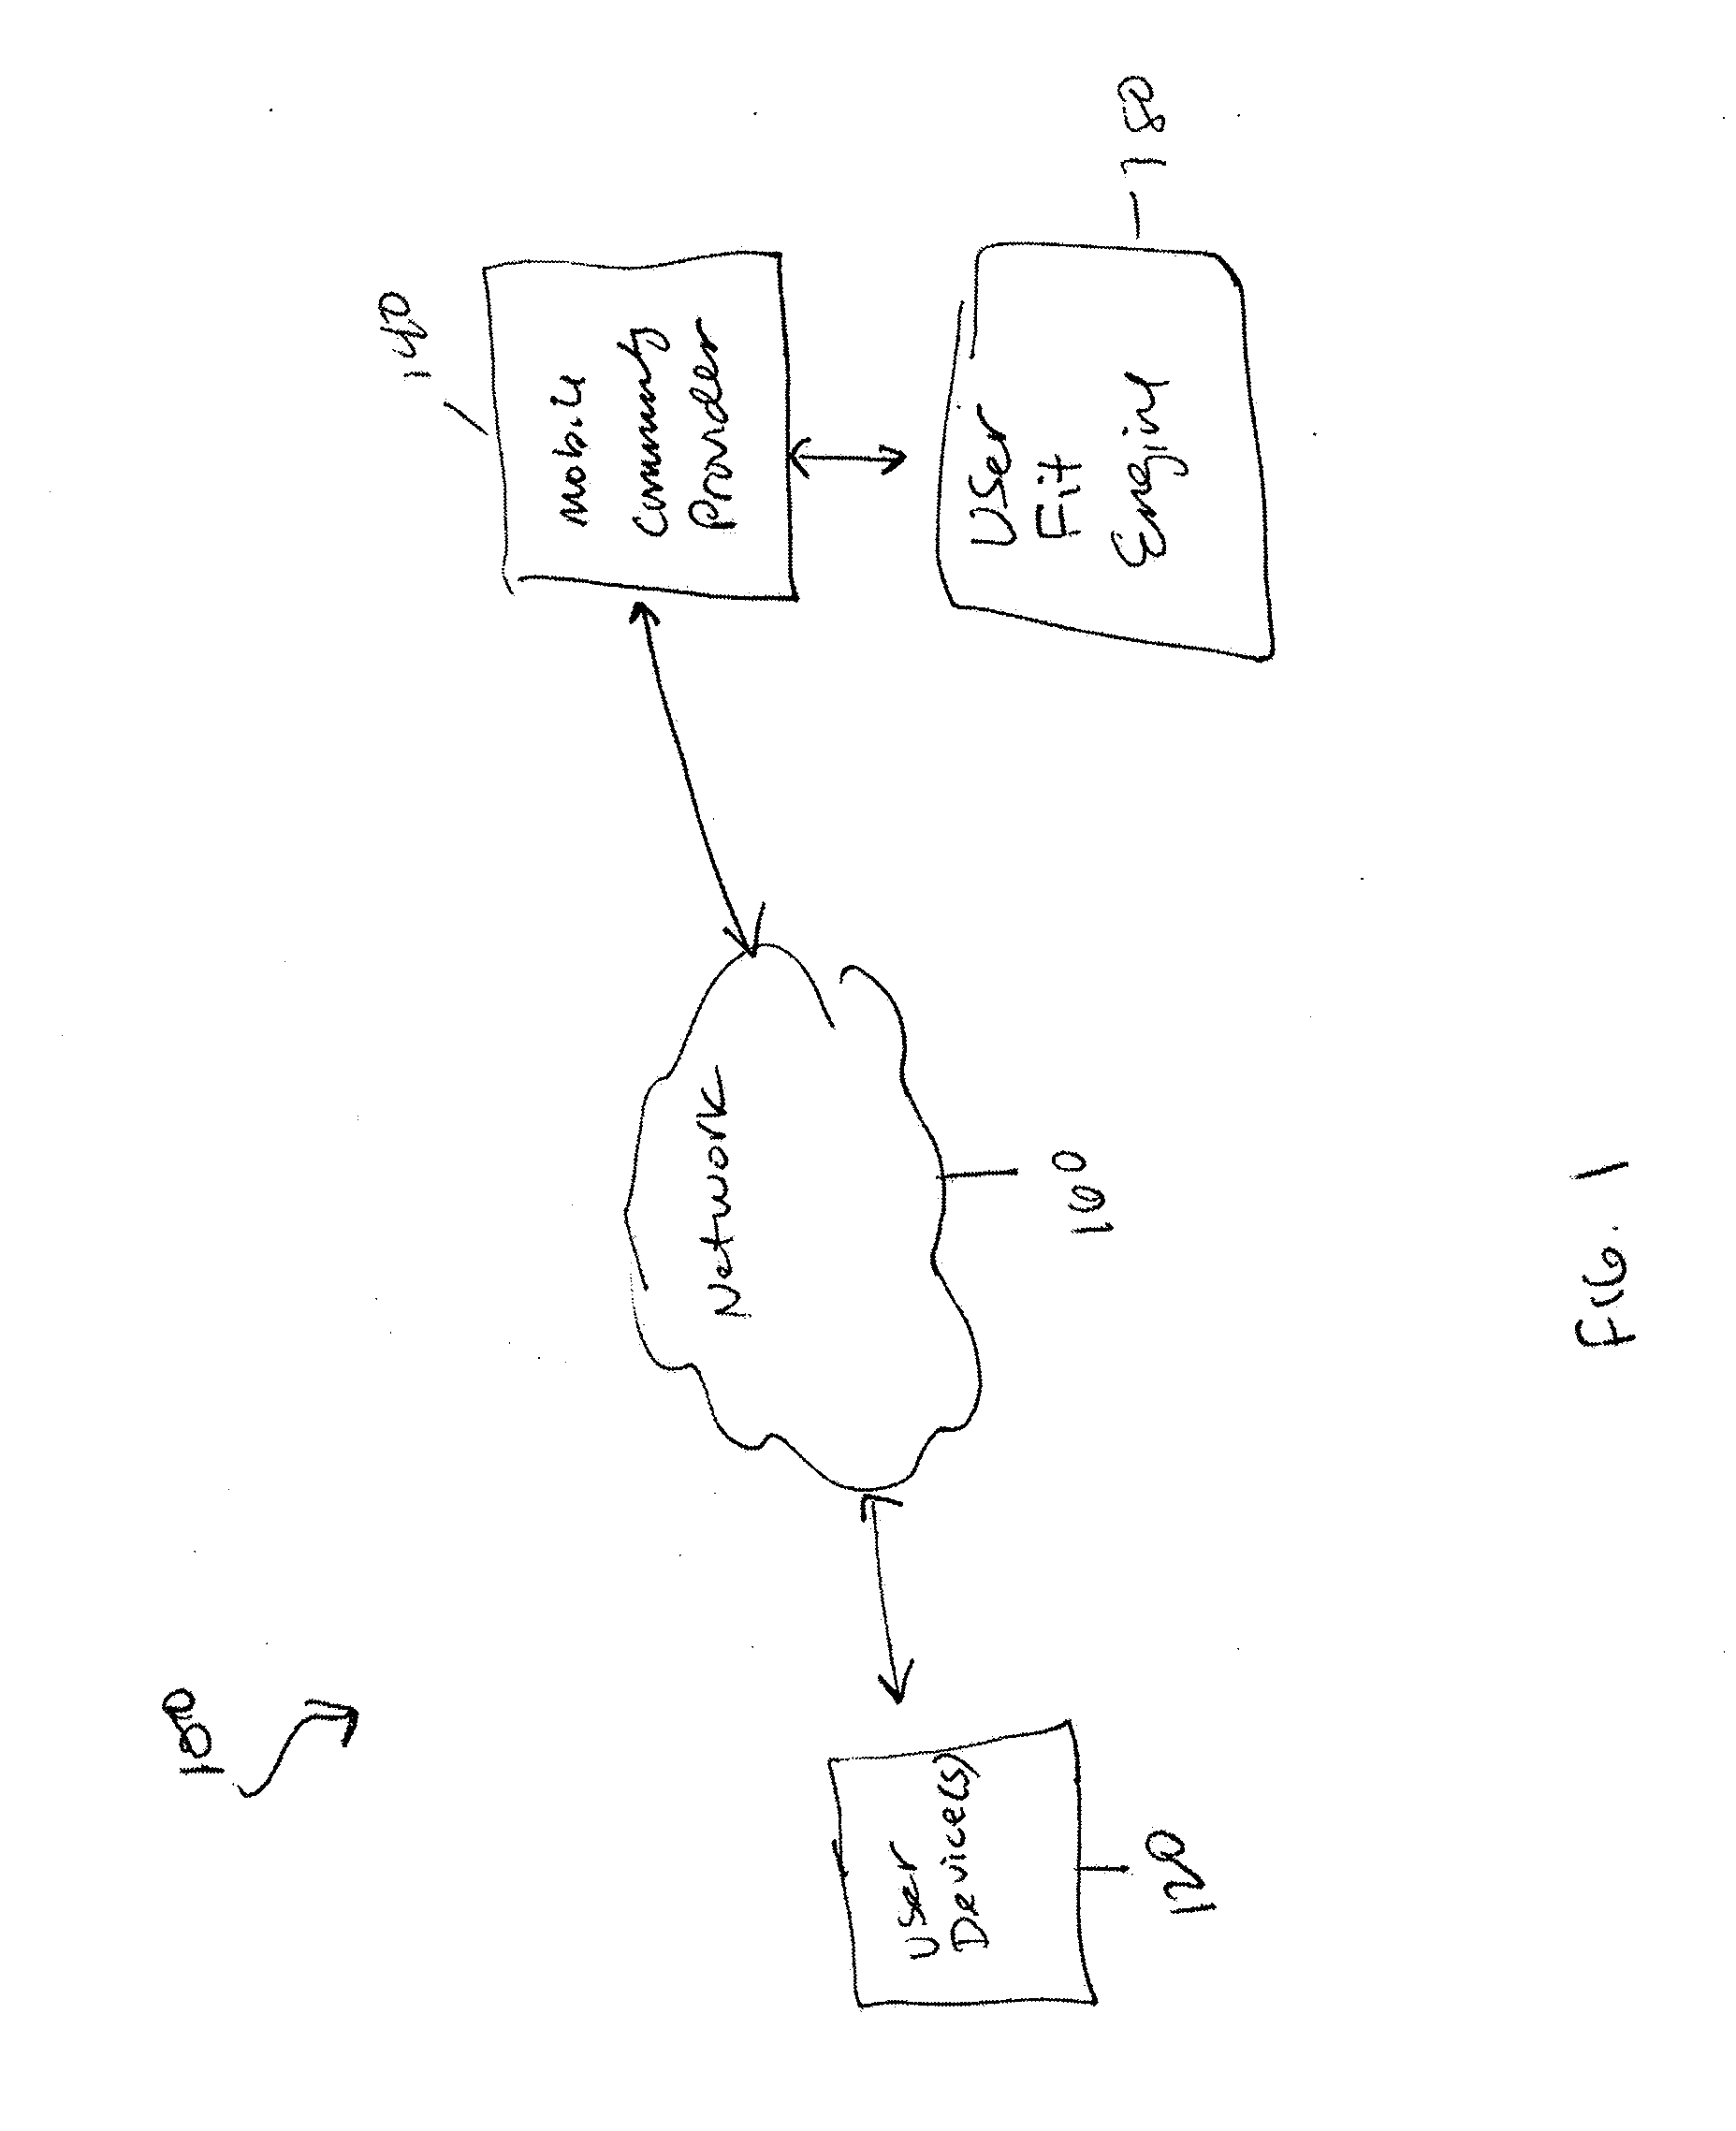 Products, systems, and methods for creating and interacting with a mobile community